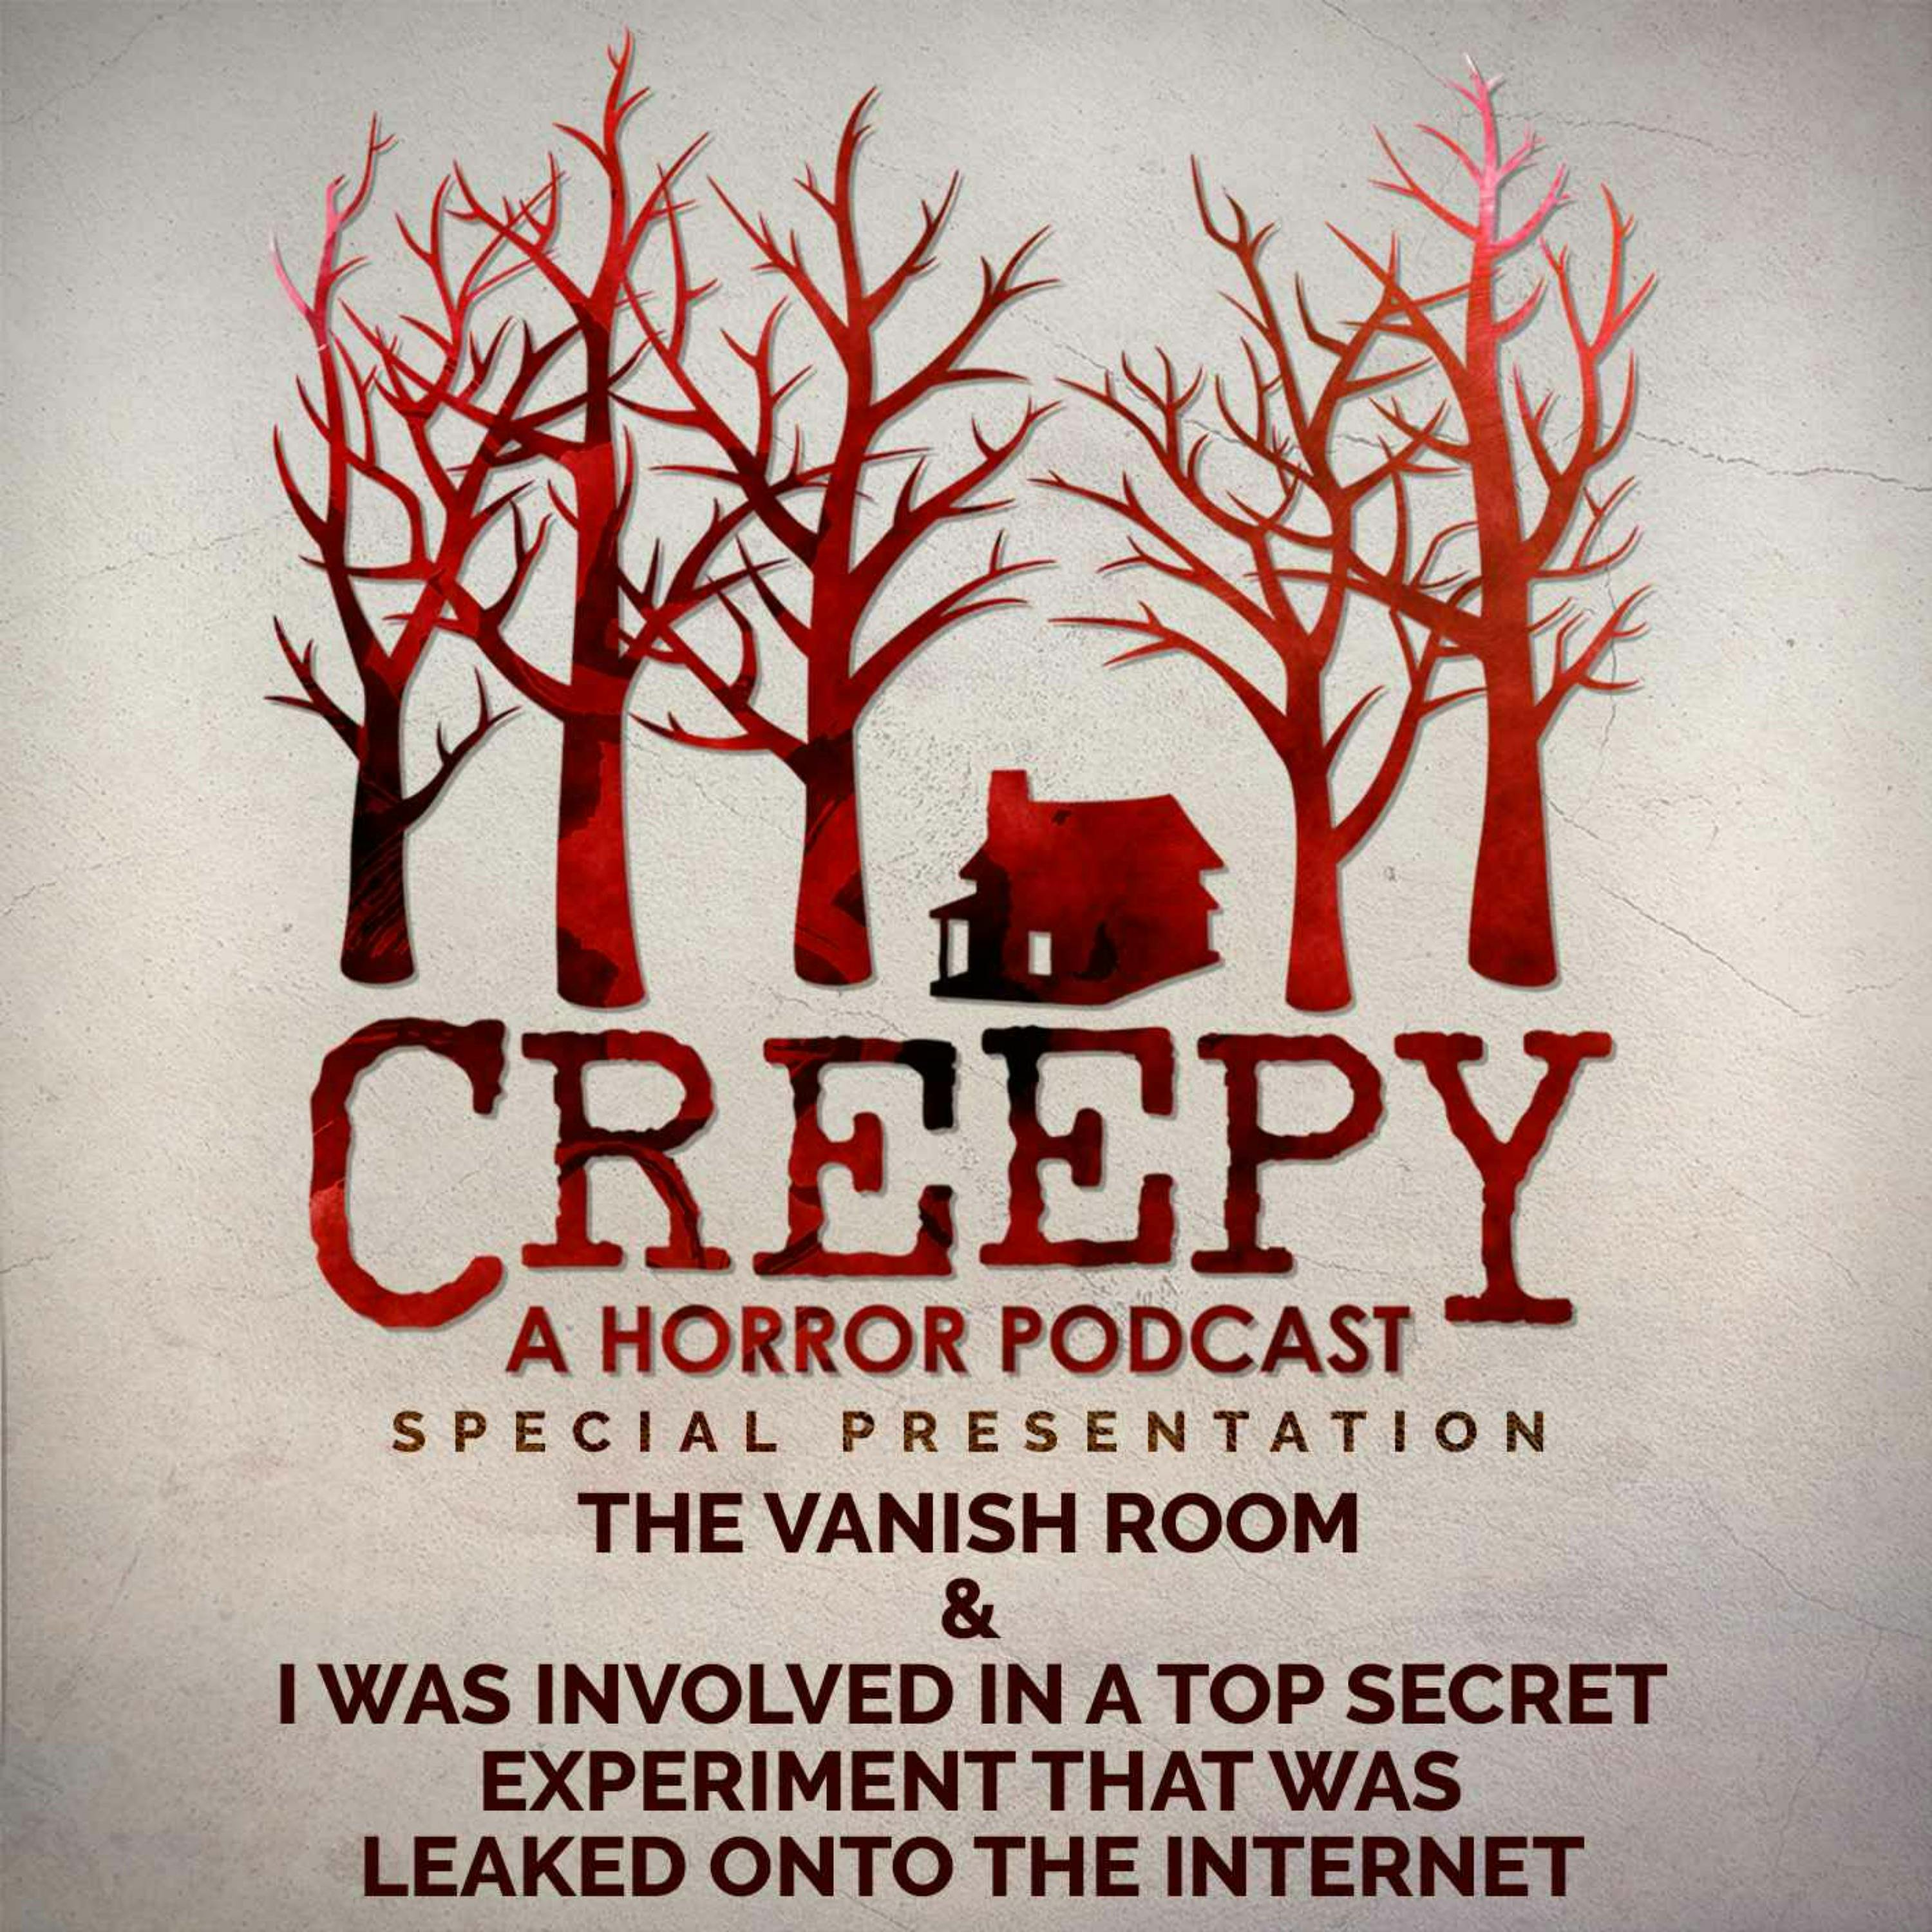 The Vanish Room & I was involved in a top secret experiment that was leaked onto the internet